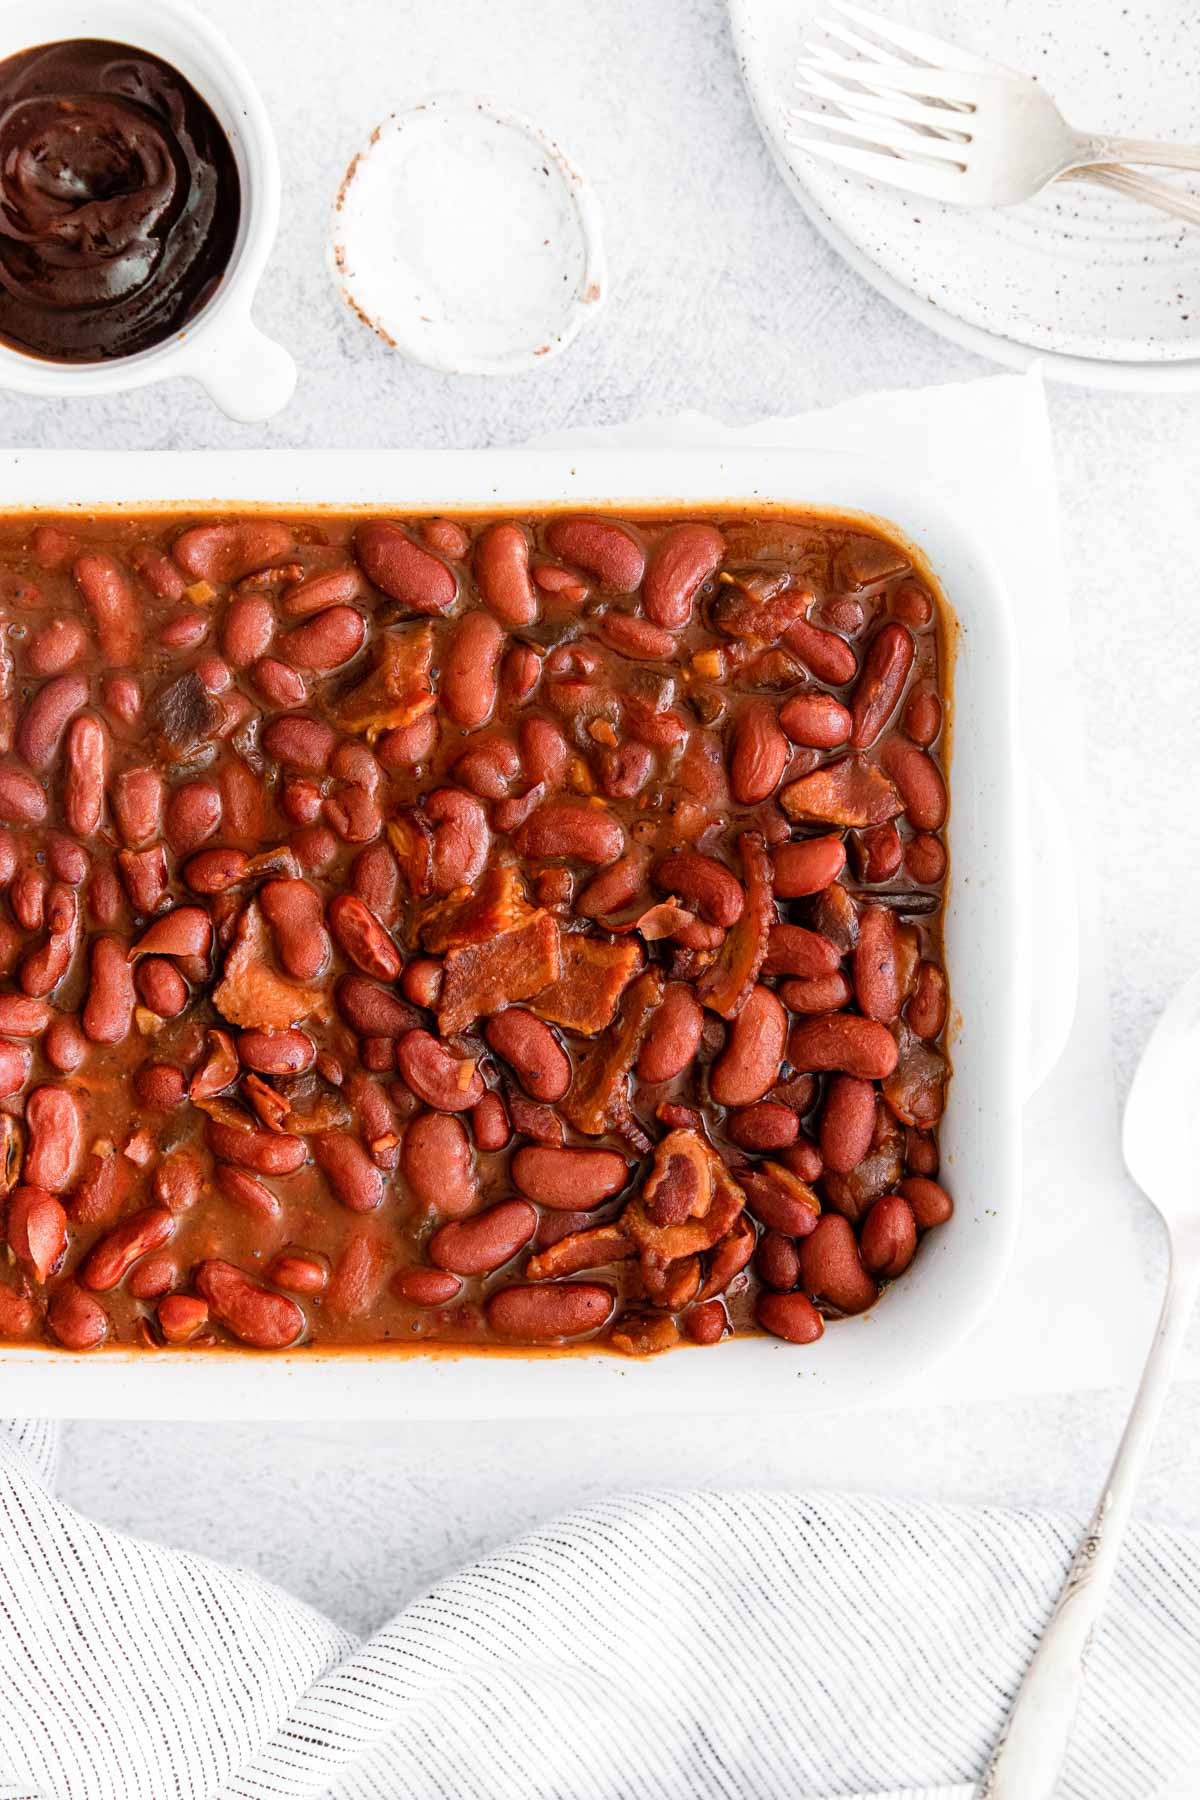 the completed instant pot baked beans recipe on a table